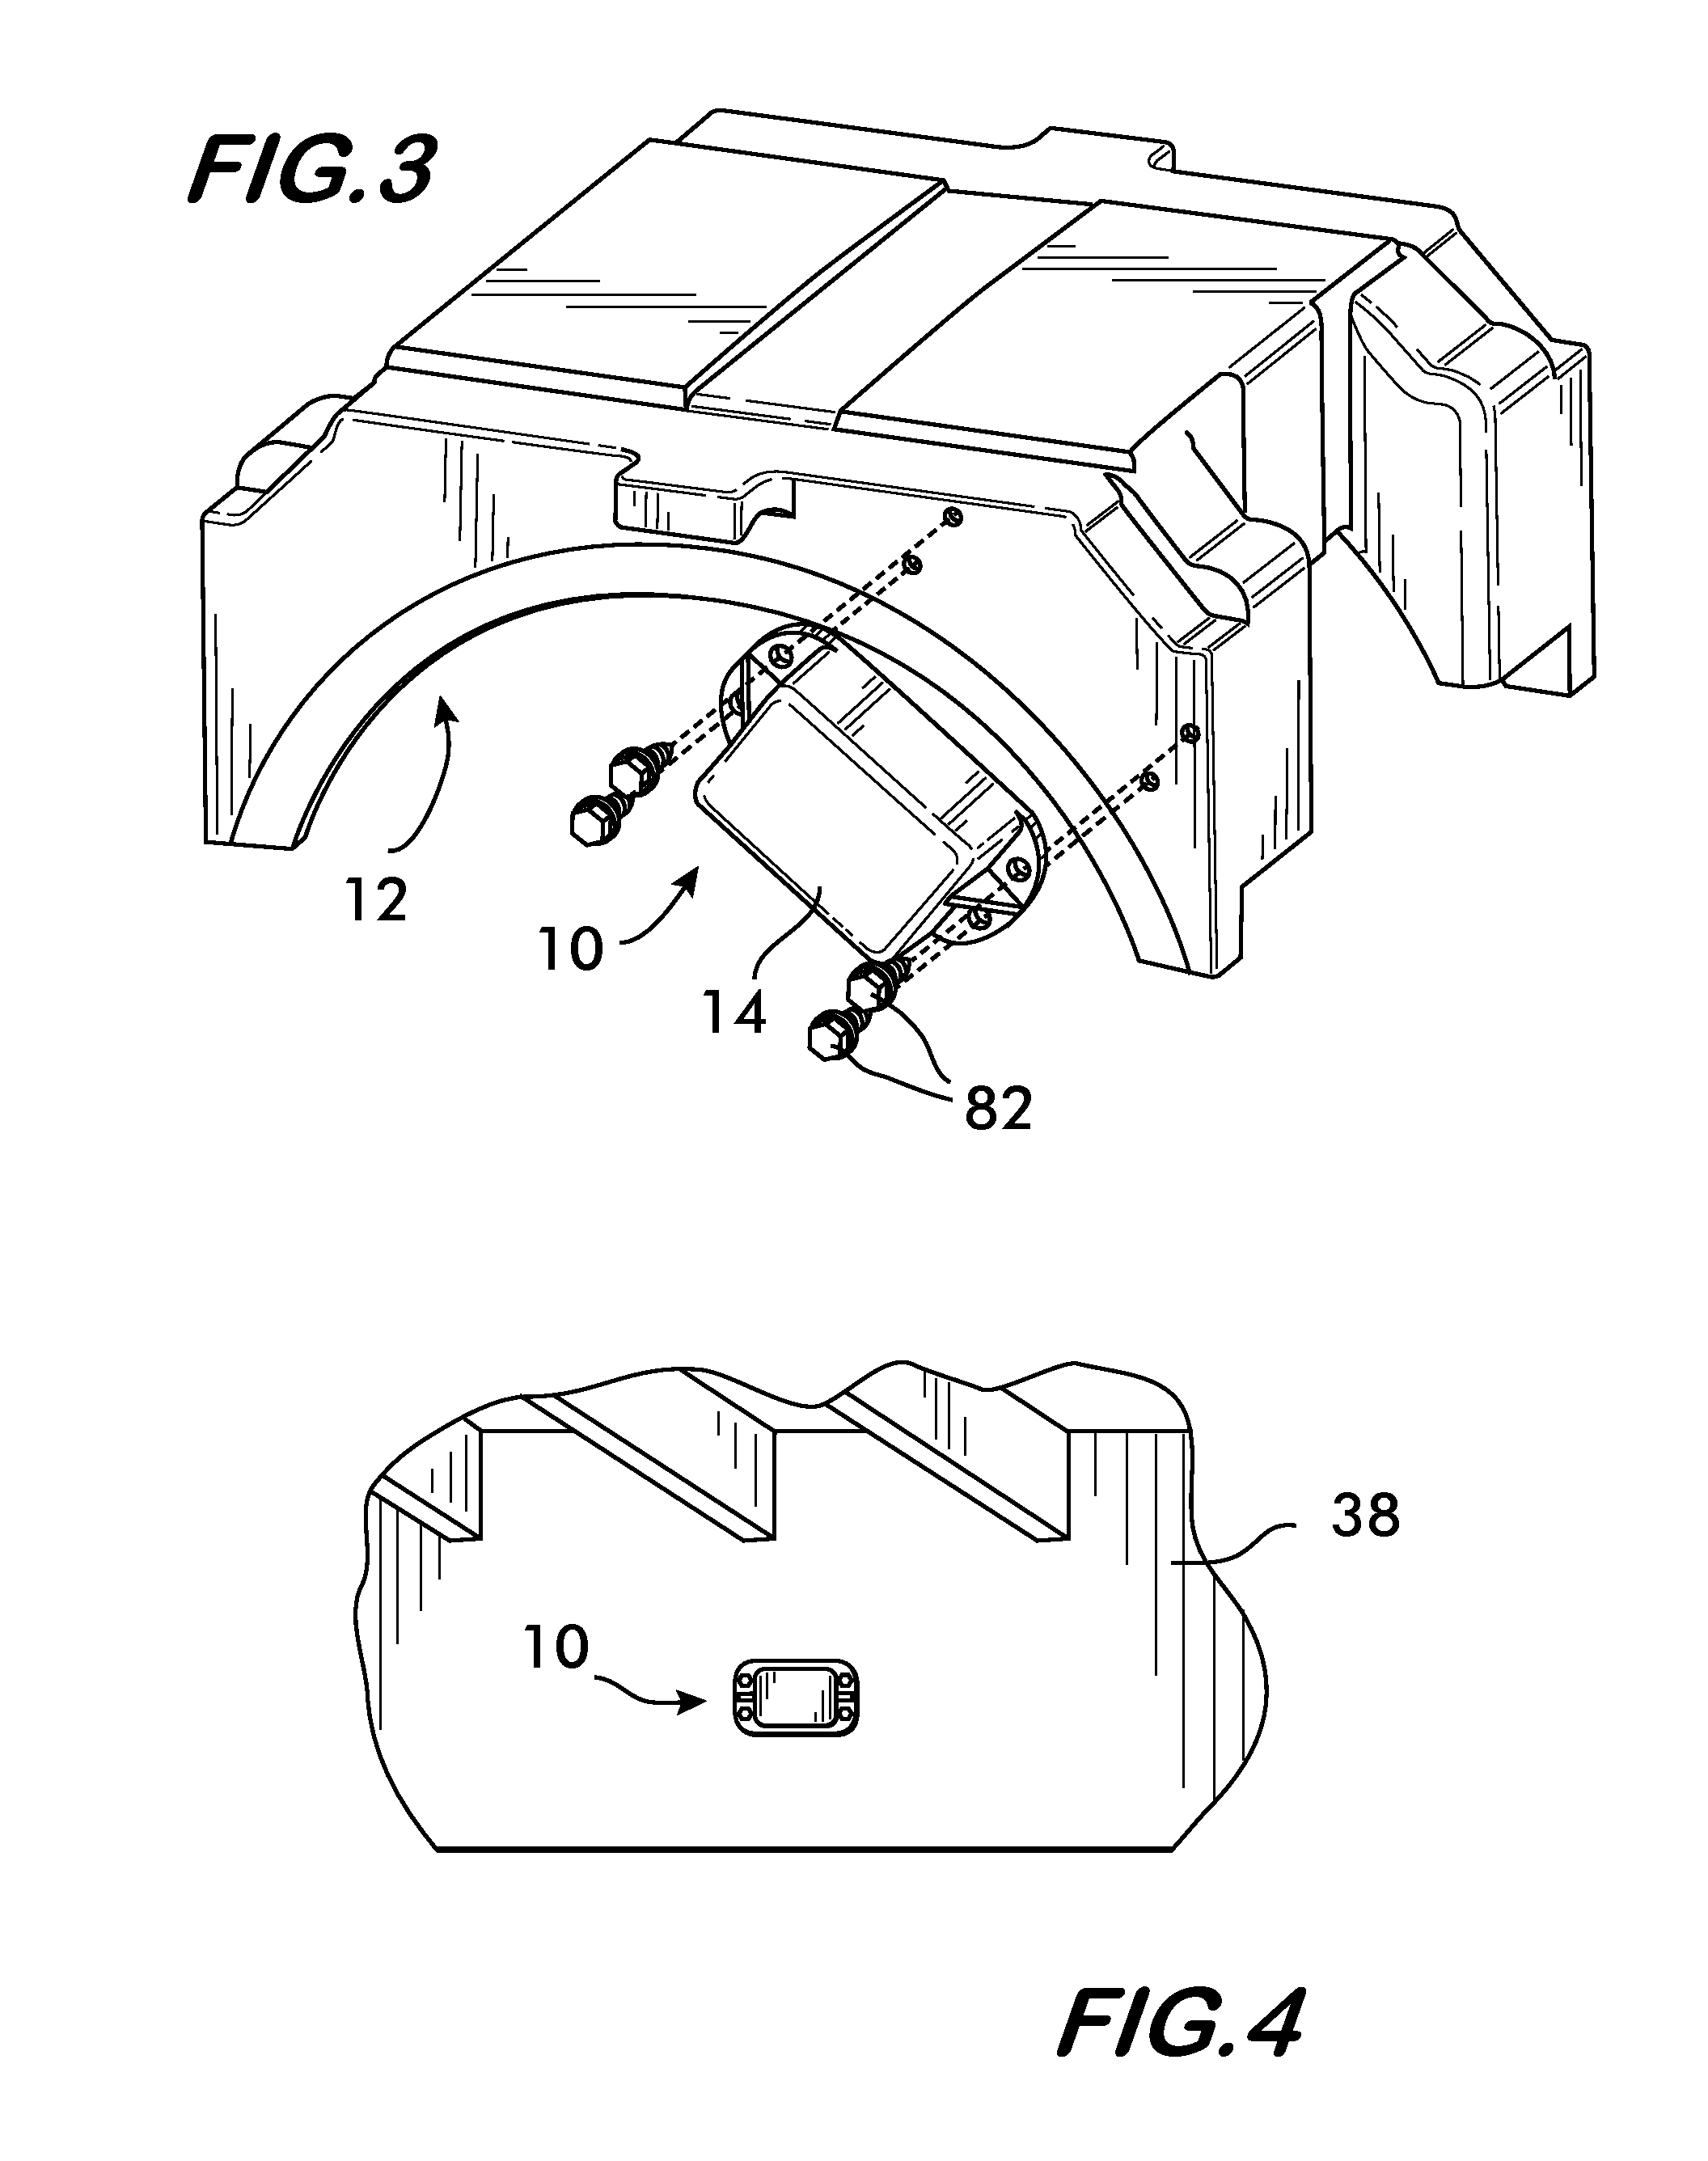 System and Method for Monitoring Railcar Performance